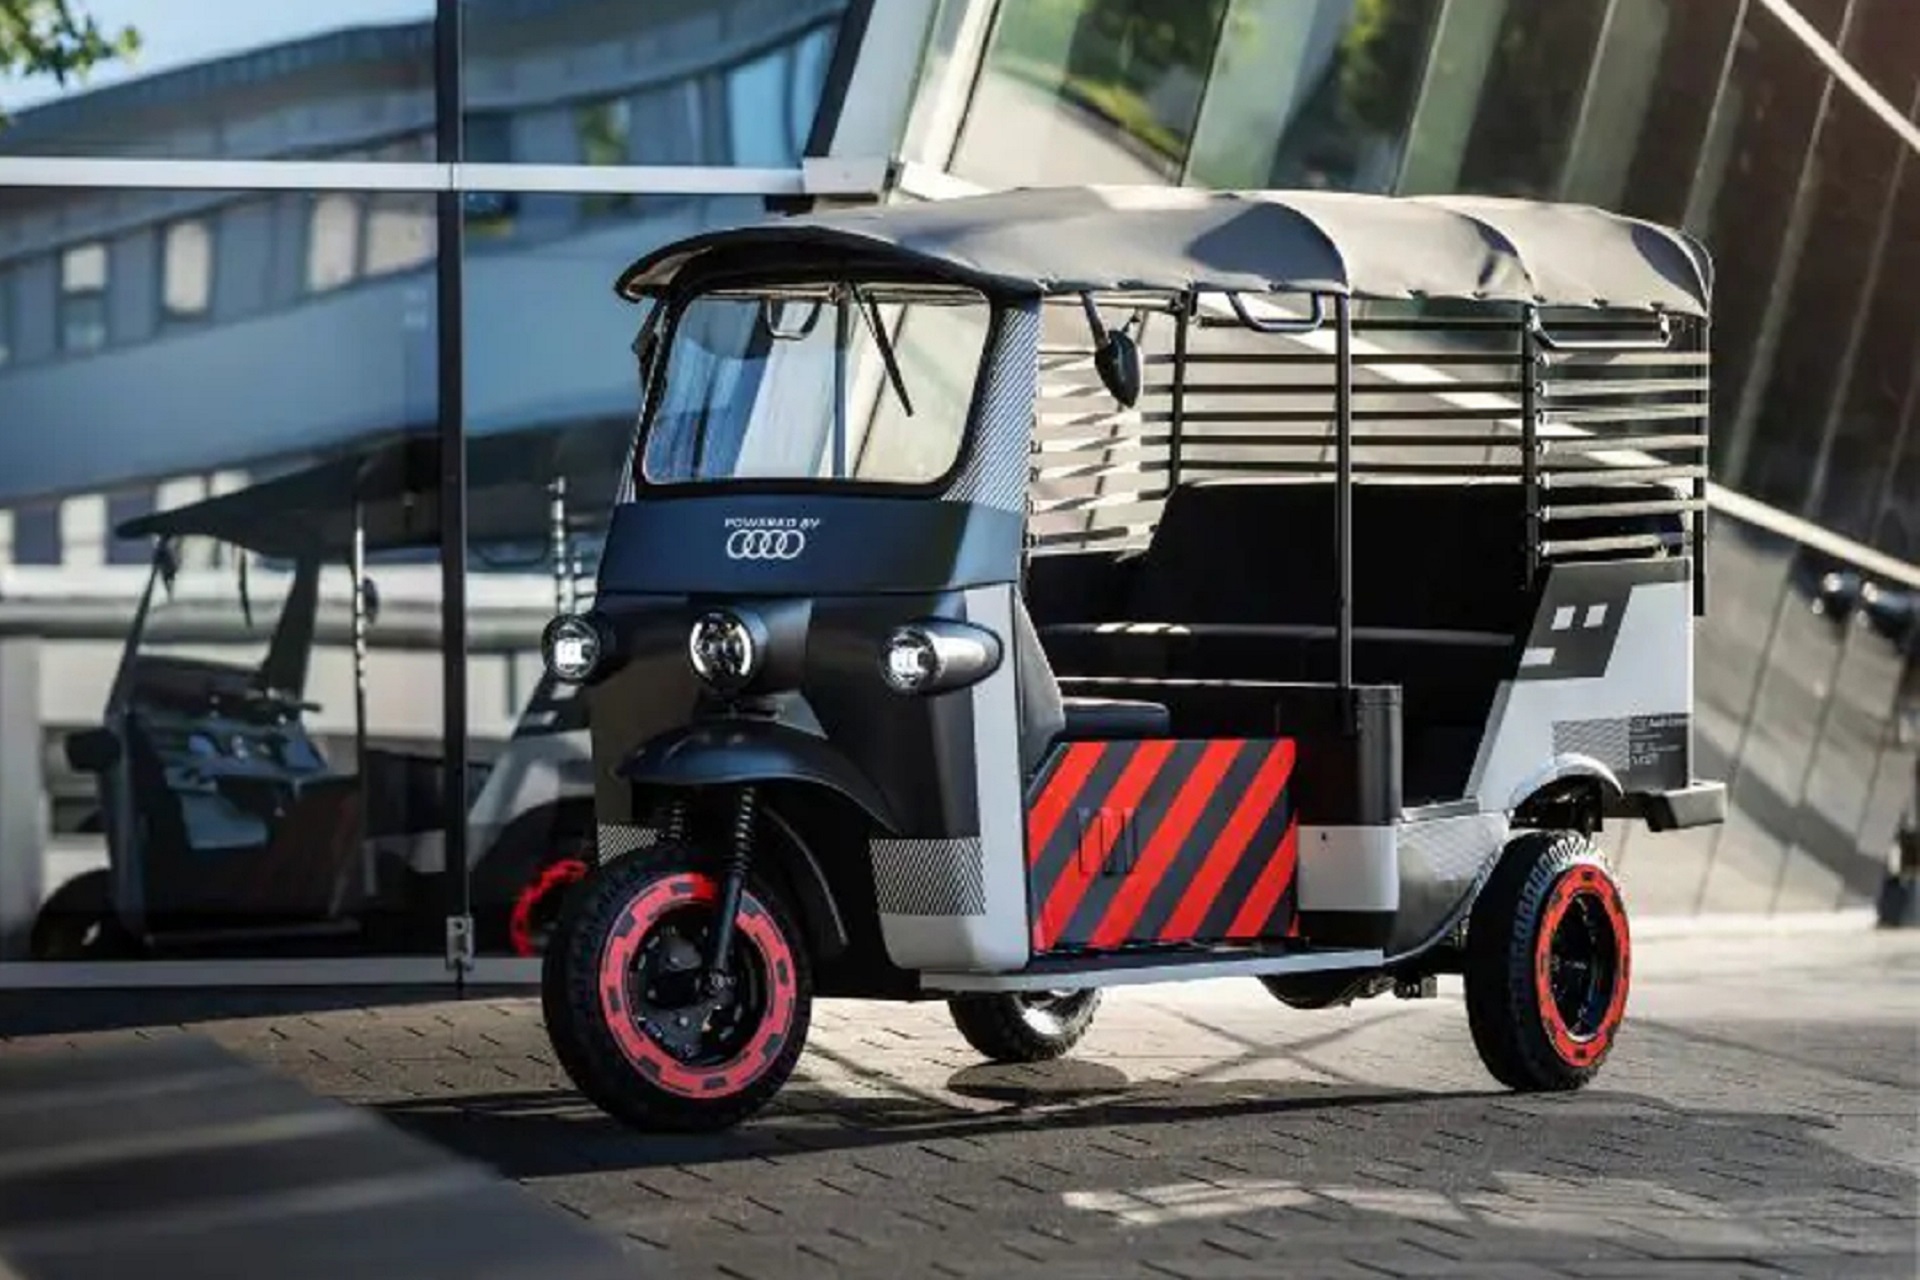 Audi e-tron Will Give Life To Electric Rickshaws In India